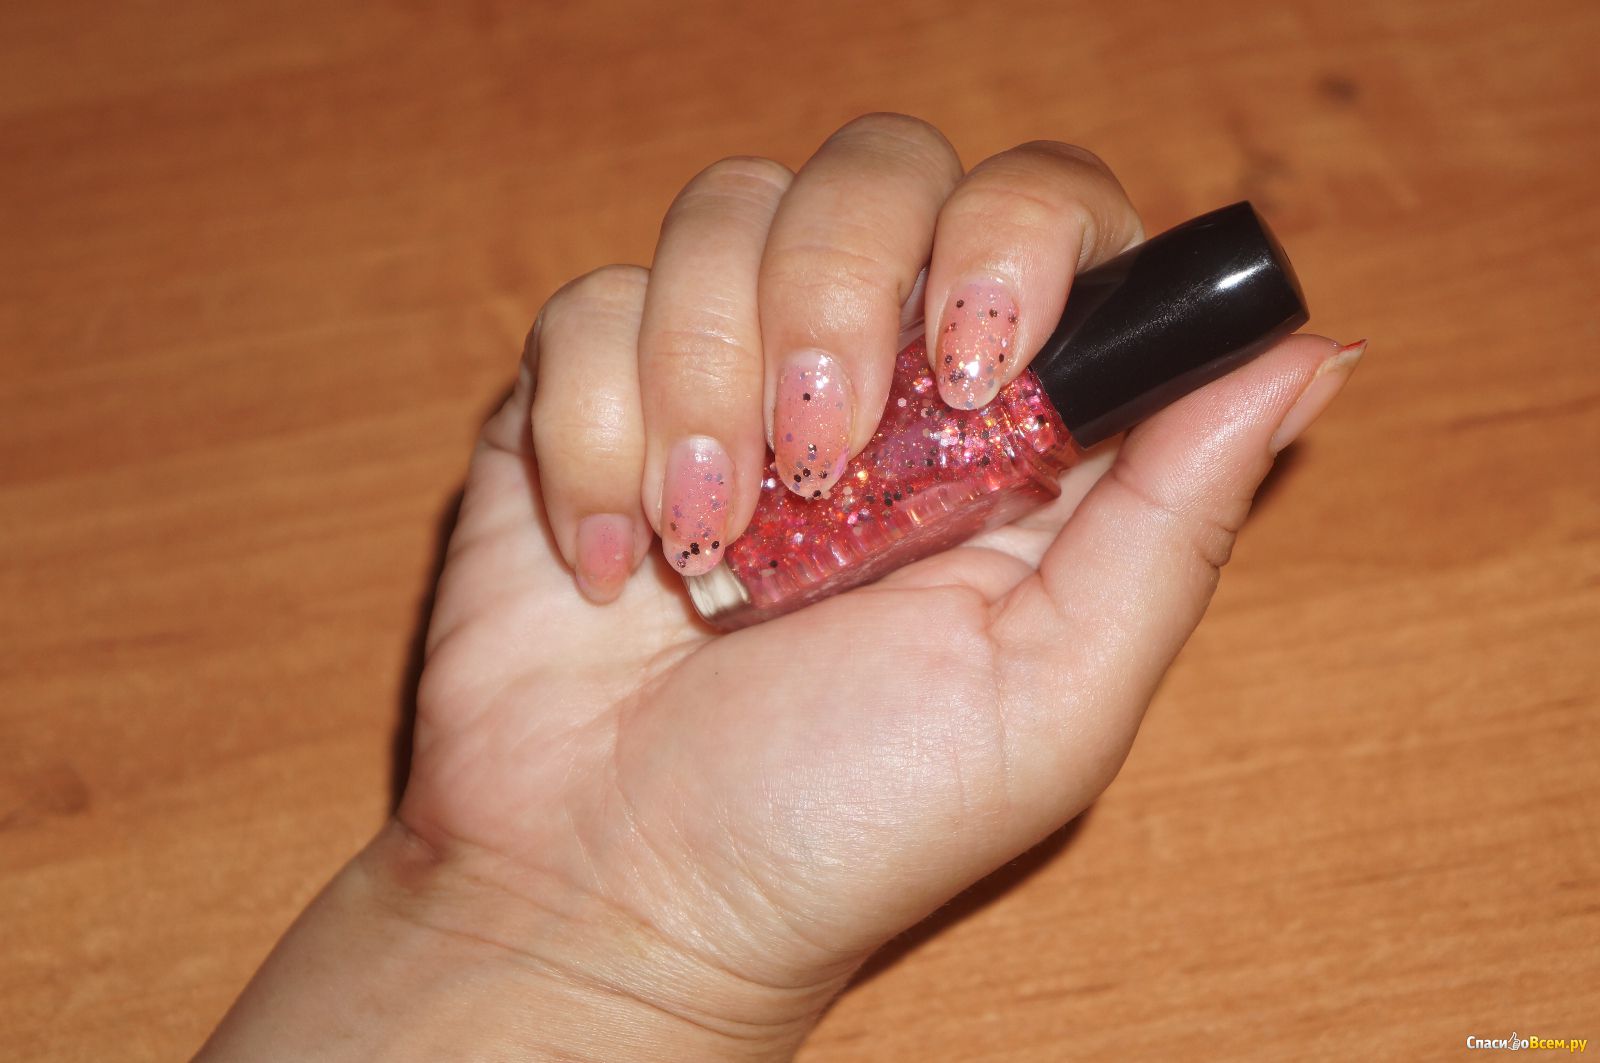 4. Sally Hansen Triple Shine Nail Color in "Twinkled Pink" - wide 1